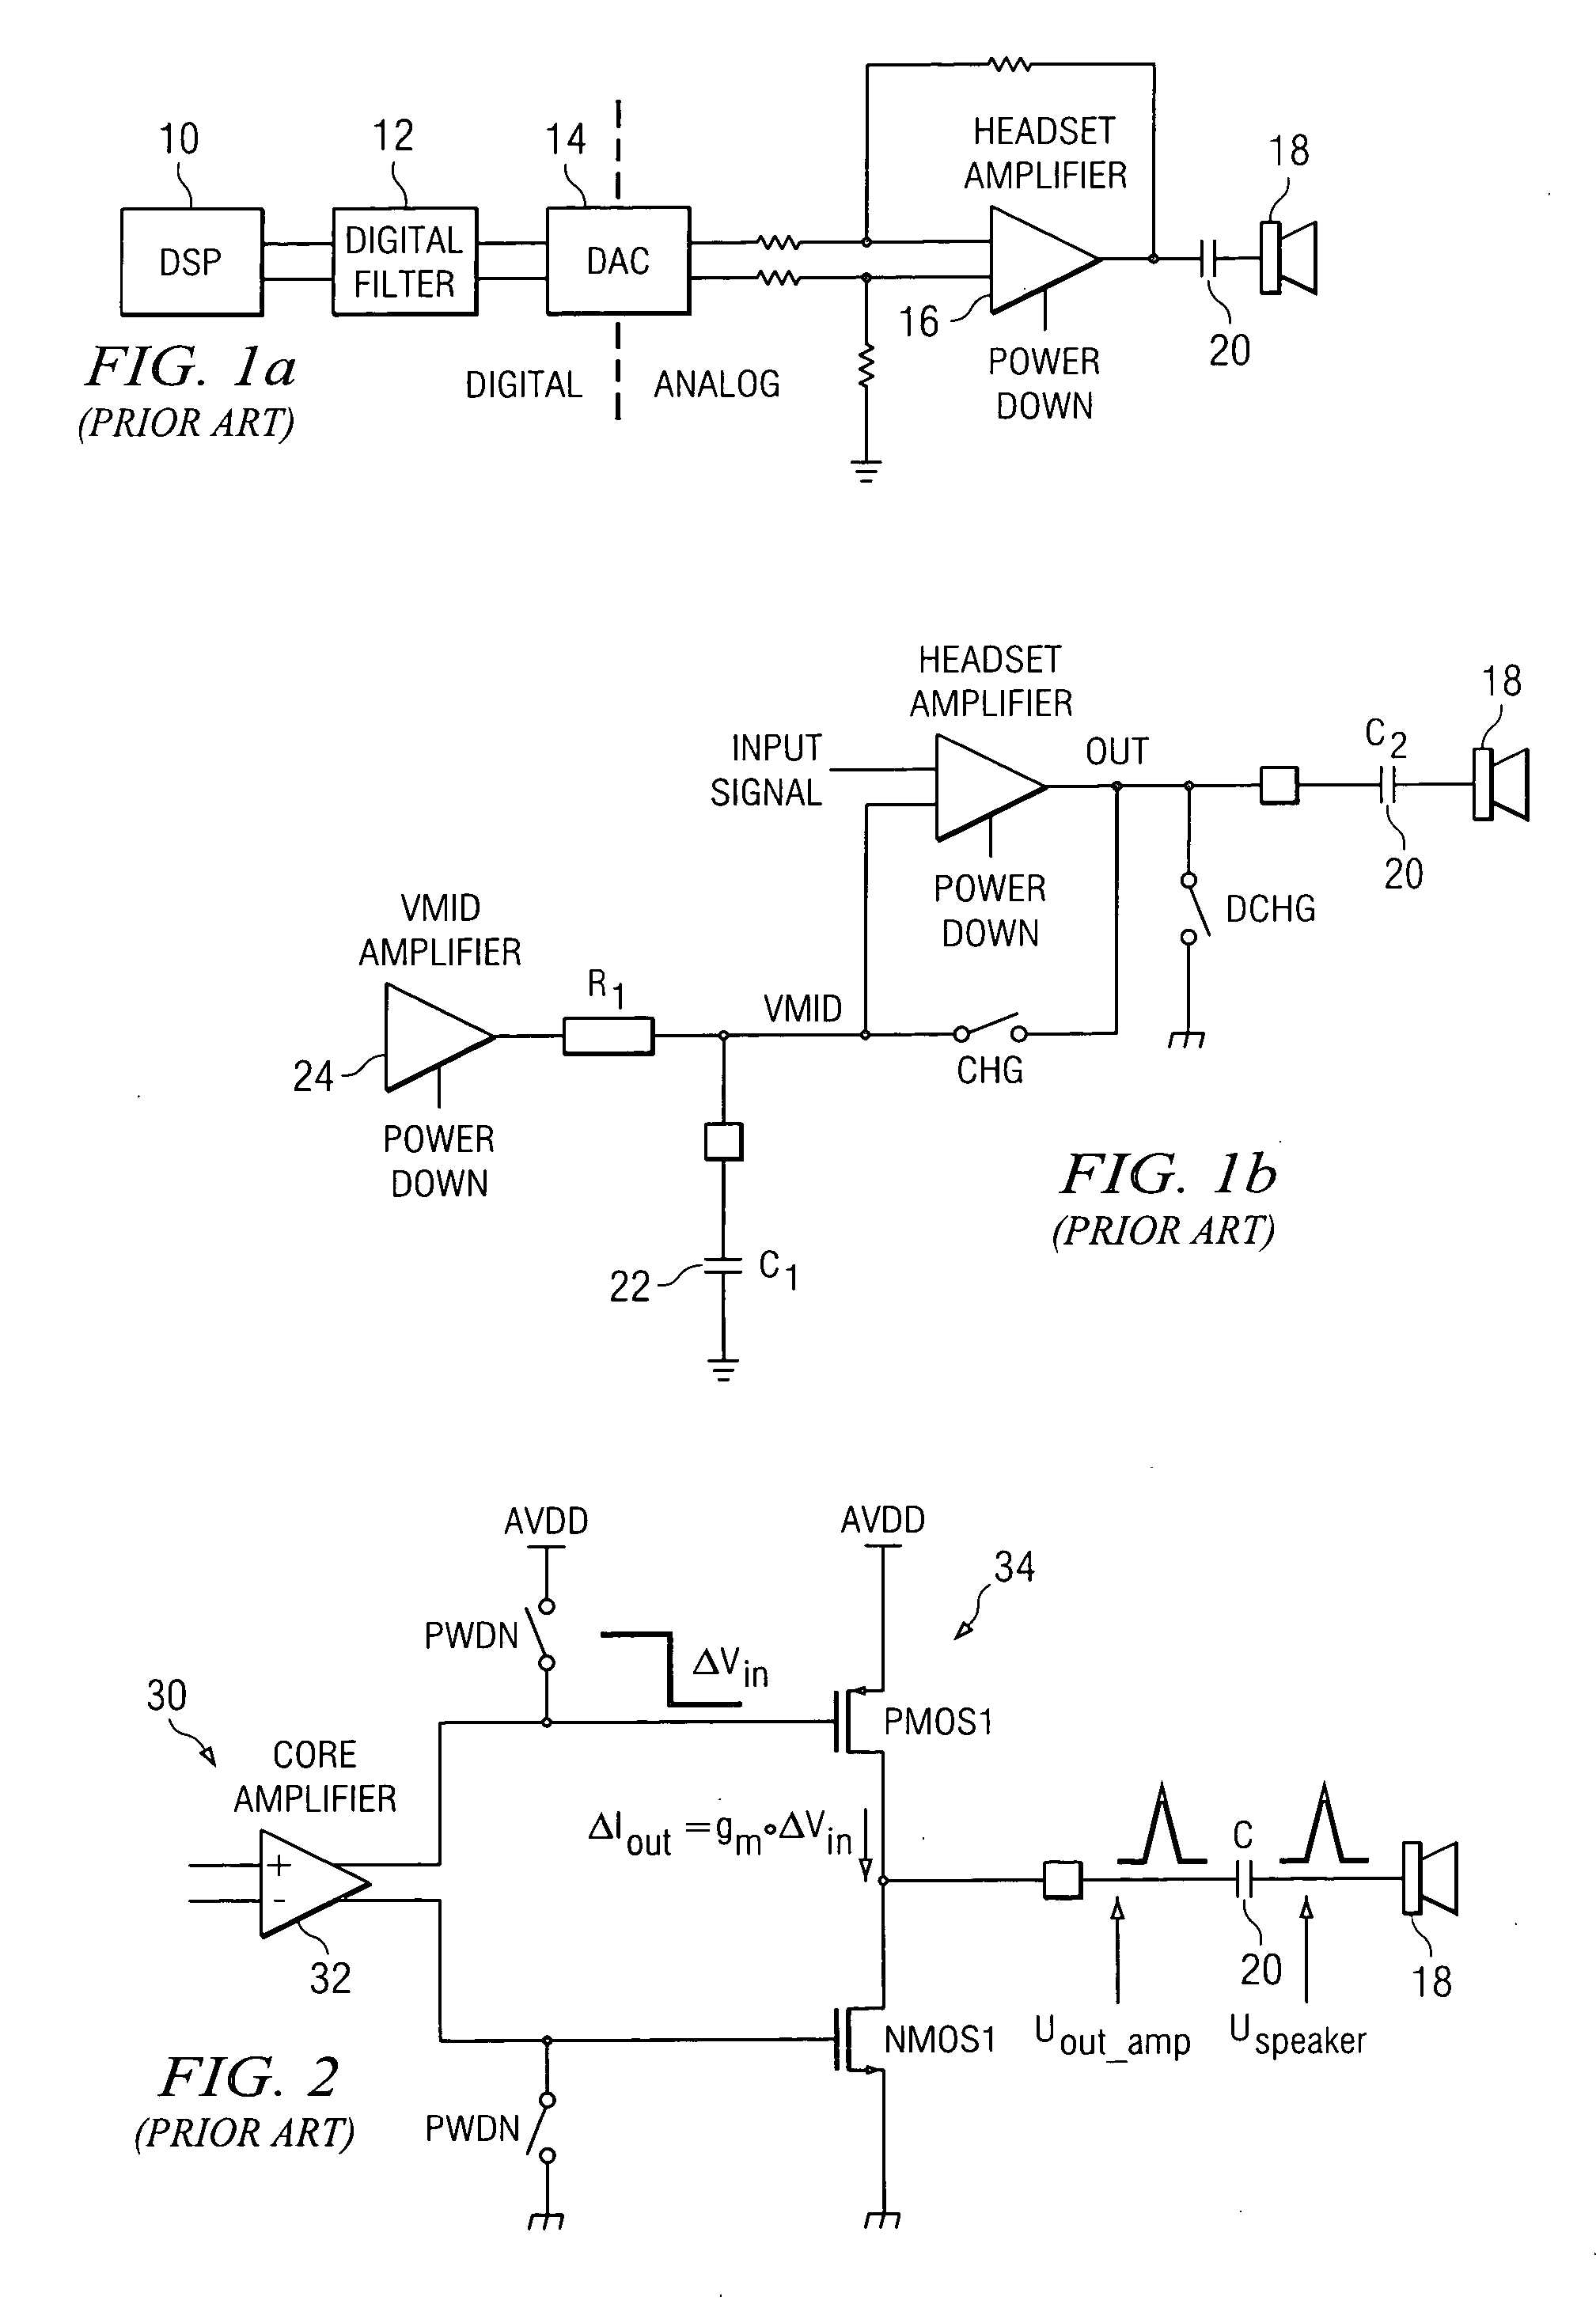 Track and hold circuit to reduce pop noise